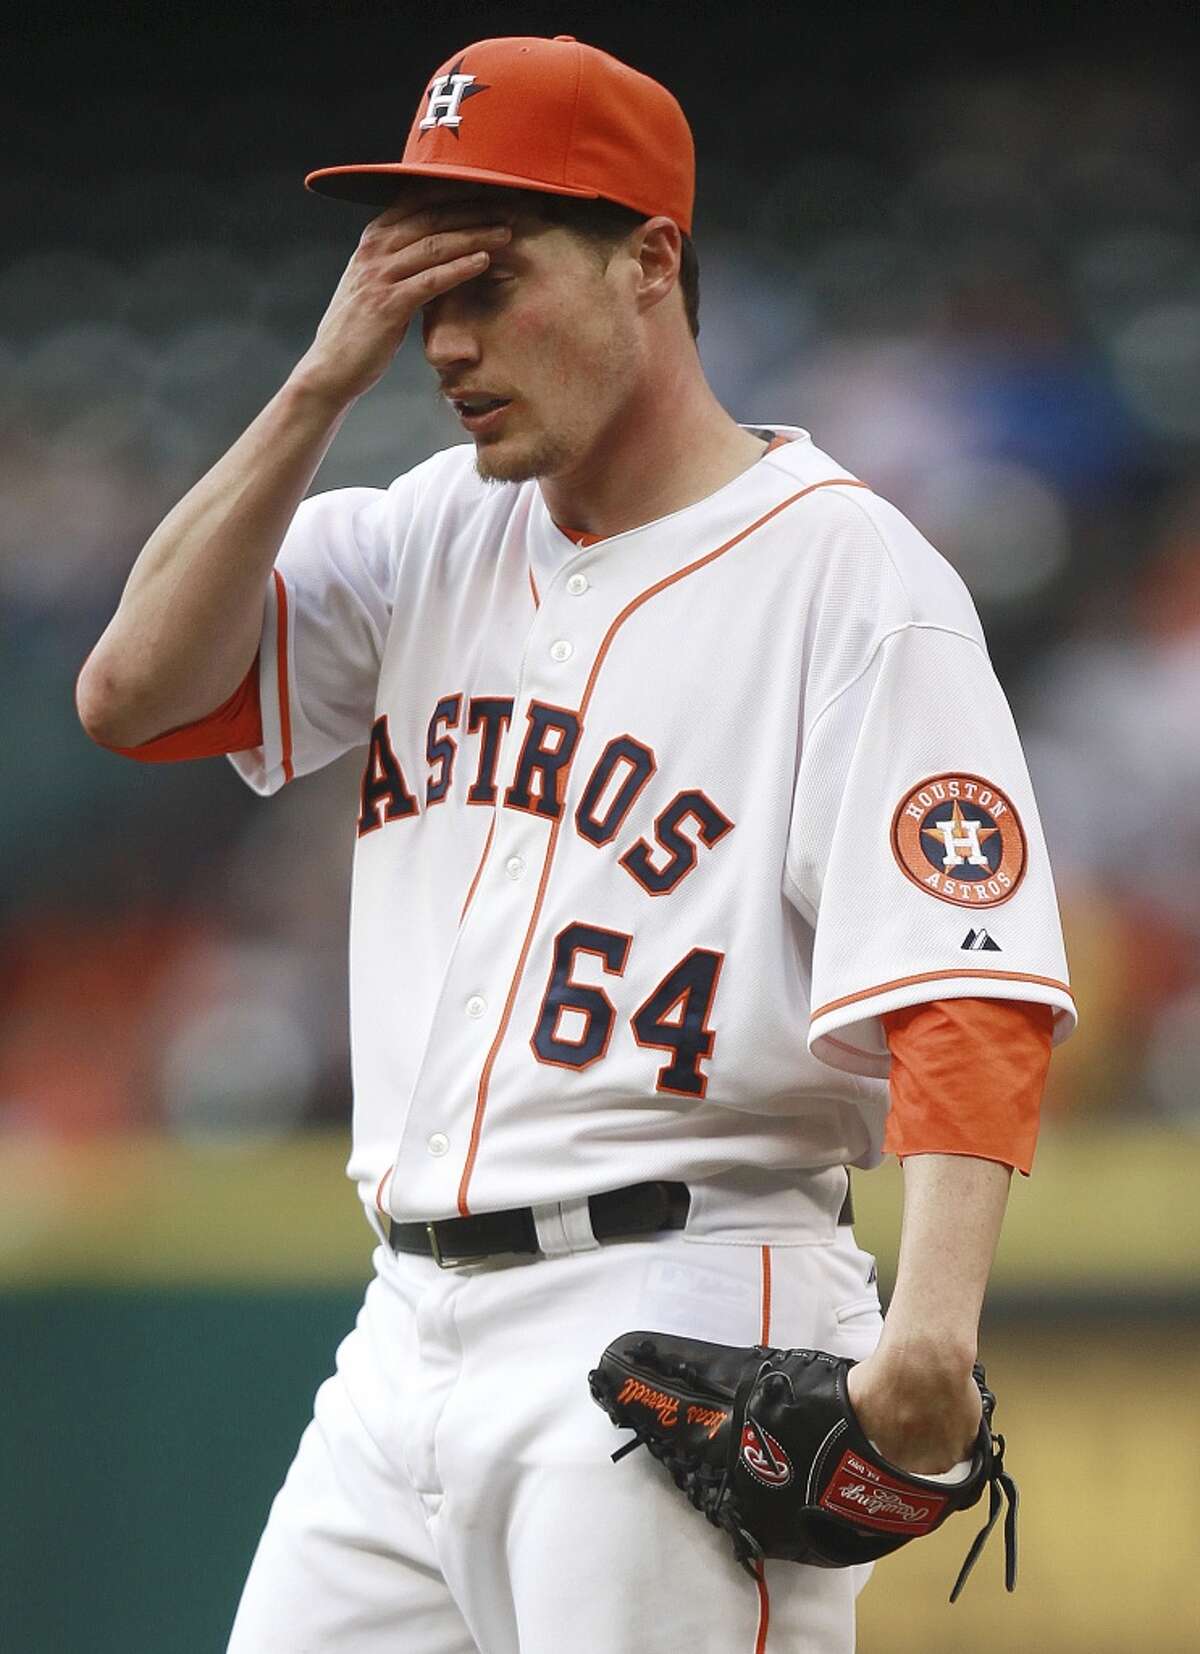 Astros pitcher Lucas Harrell has been known to voice his frustrations.